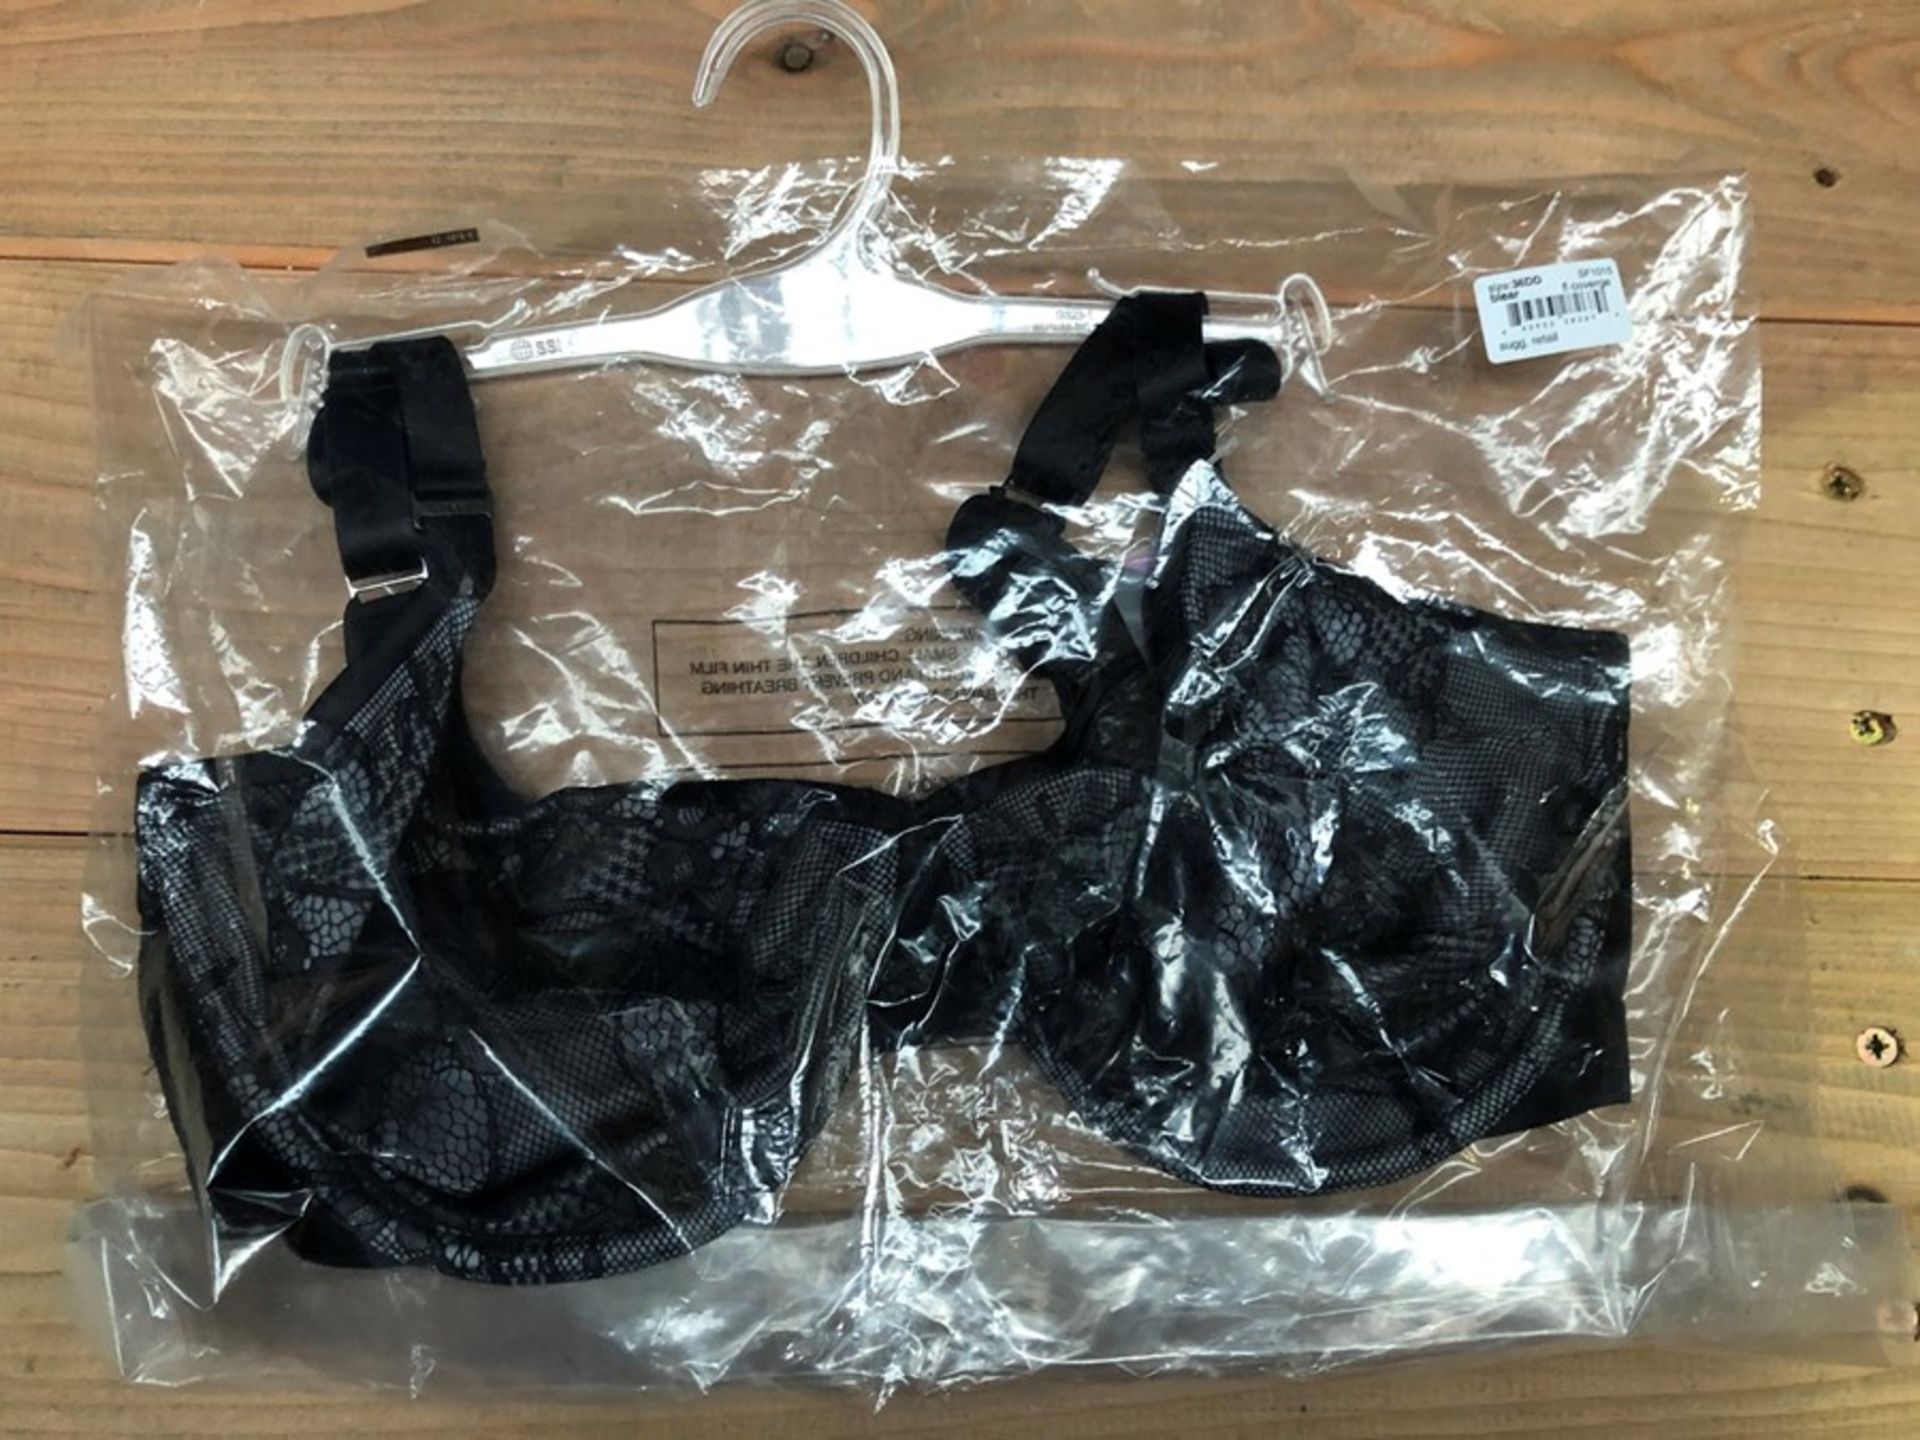 1 LOT TO CONTAIN 2 SPANX BRAS IN BLEAR / SIZE 36DD / STYLE SF1015 / RRP £136.00 (PUBLIC VIEWING